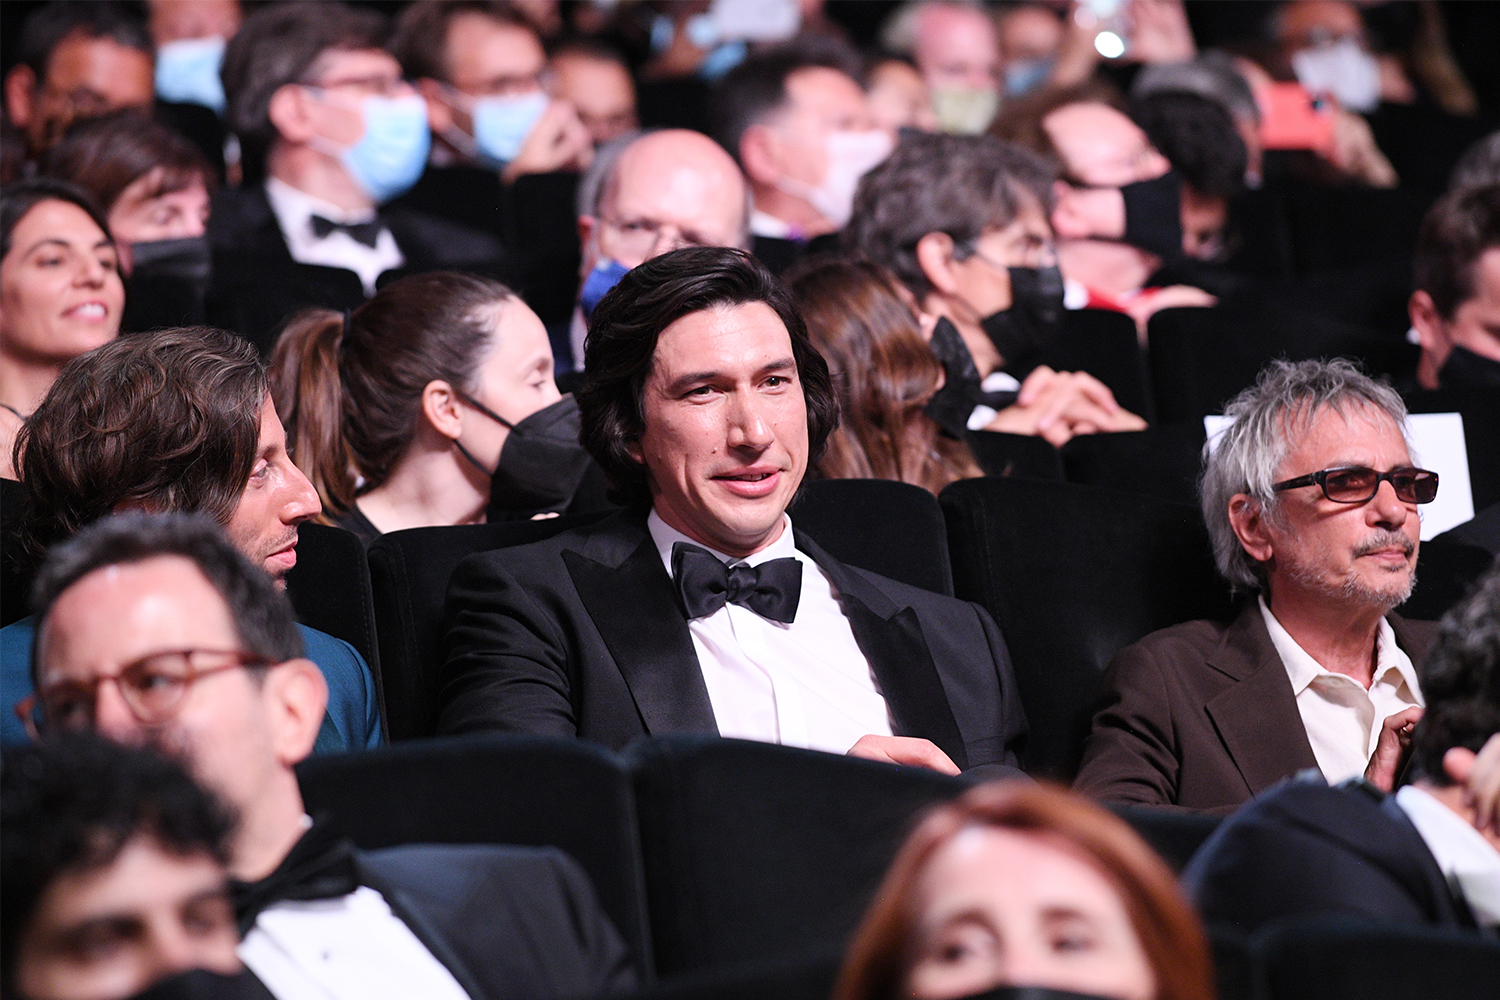 Adam Driver Won the Opening Night of Cannes 2021